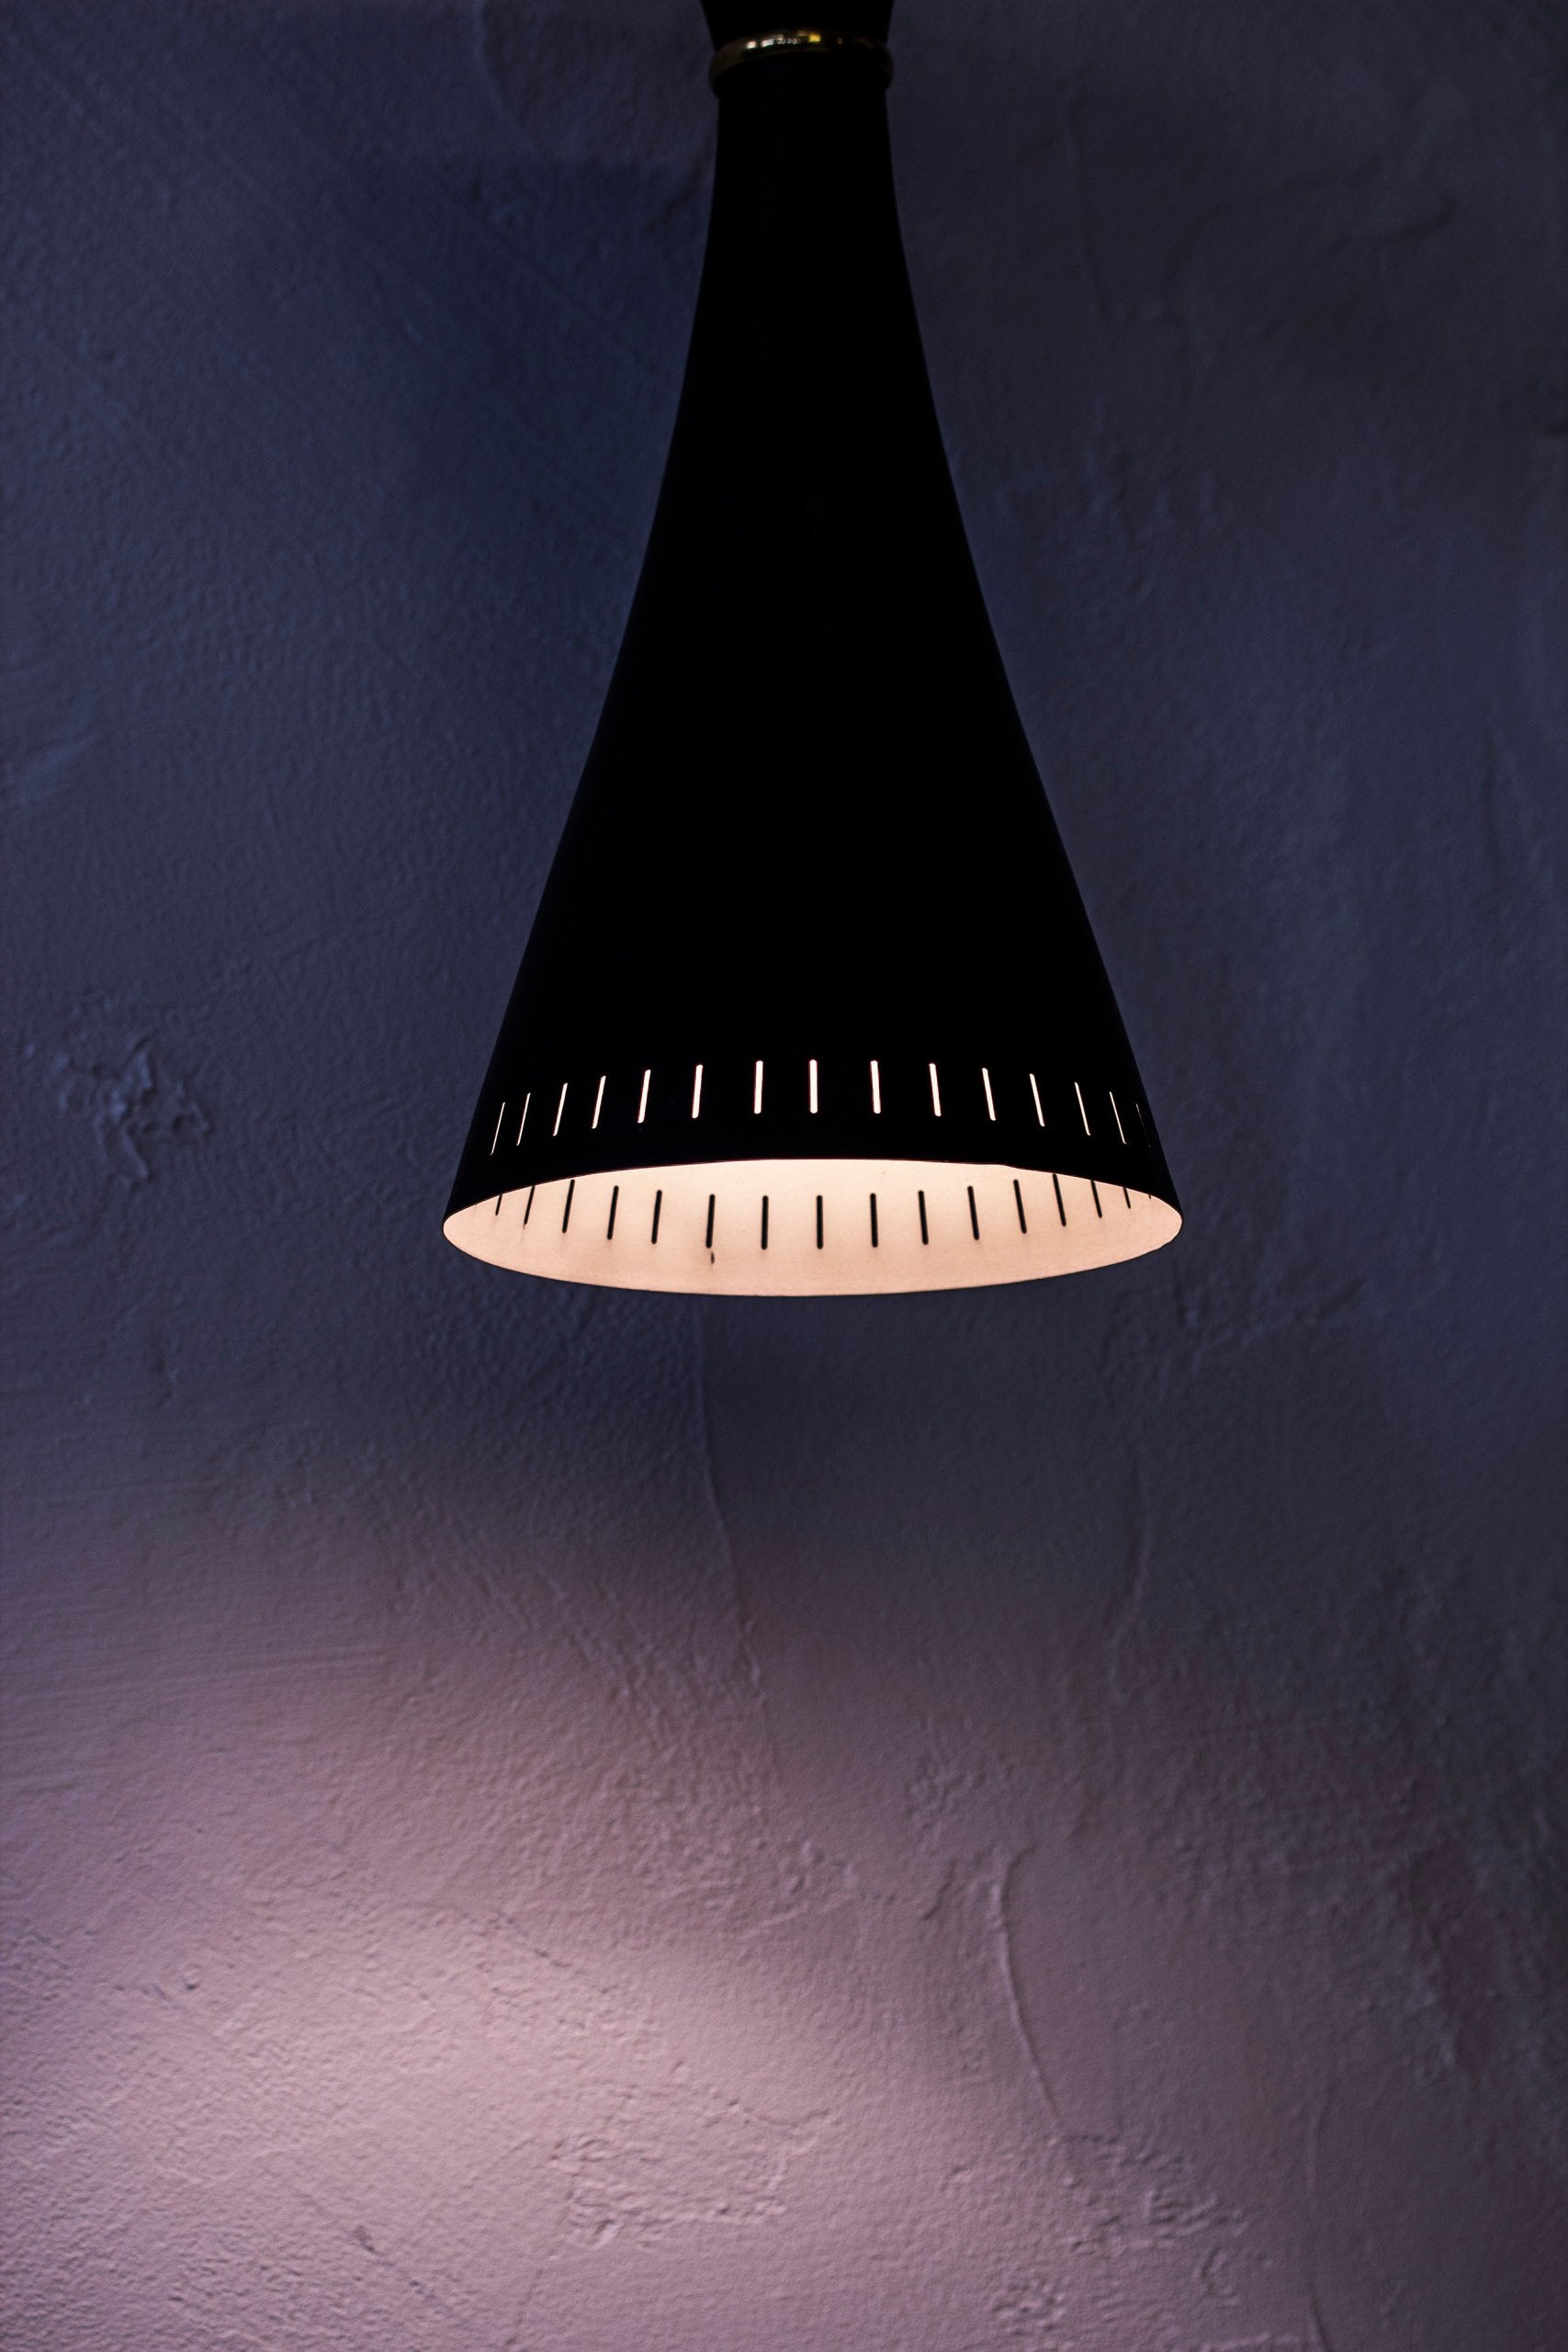 "Diabolo" ceiling lamp from ASEA belysning